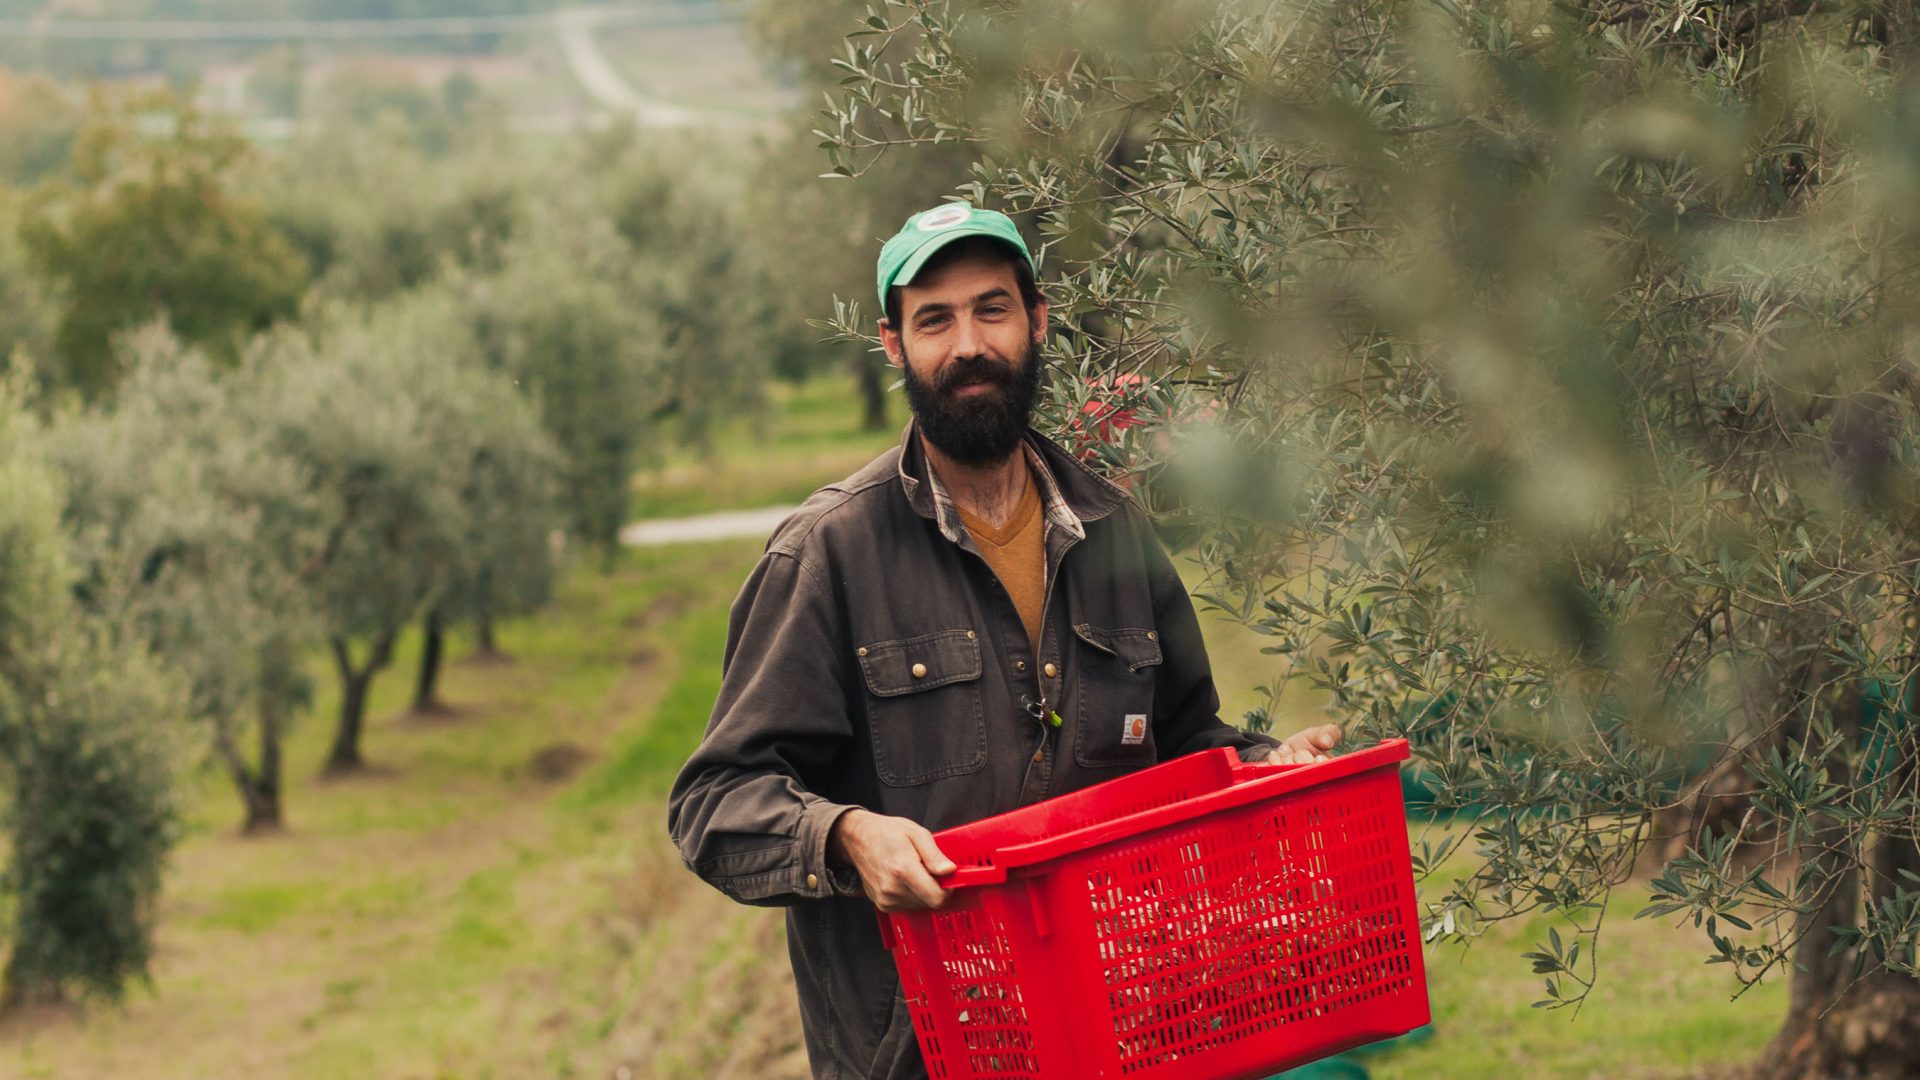 Ever just wanted to move to Tuscany and make olive oil? This New Yorker did just that